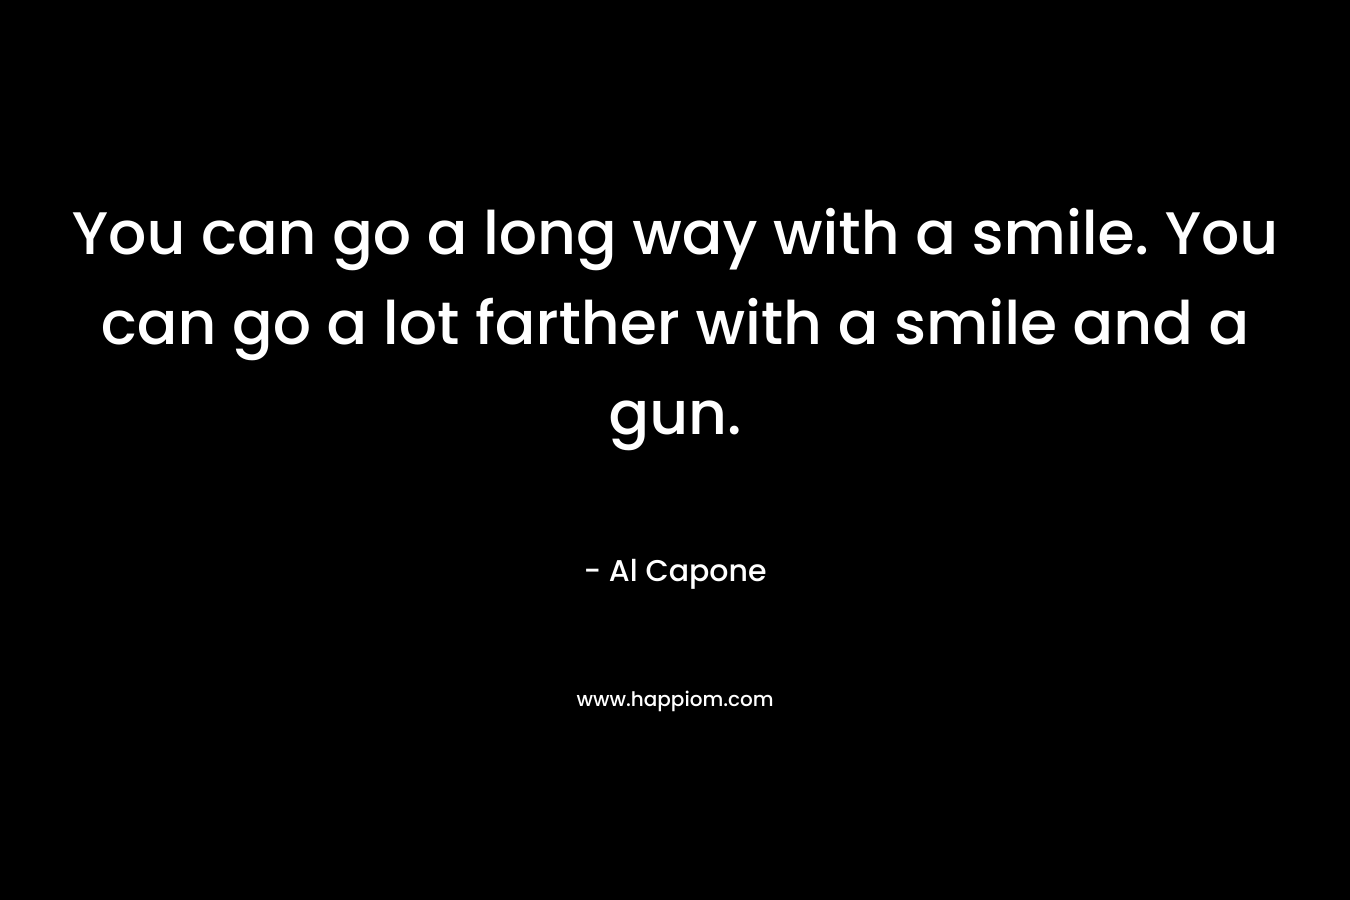 You can go a long way with a smile. You can go a lot farther with a smile and a gun. – Al Capone